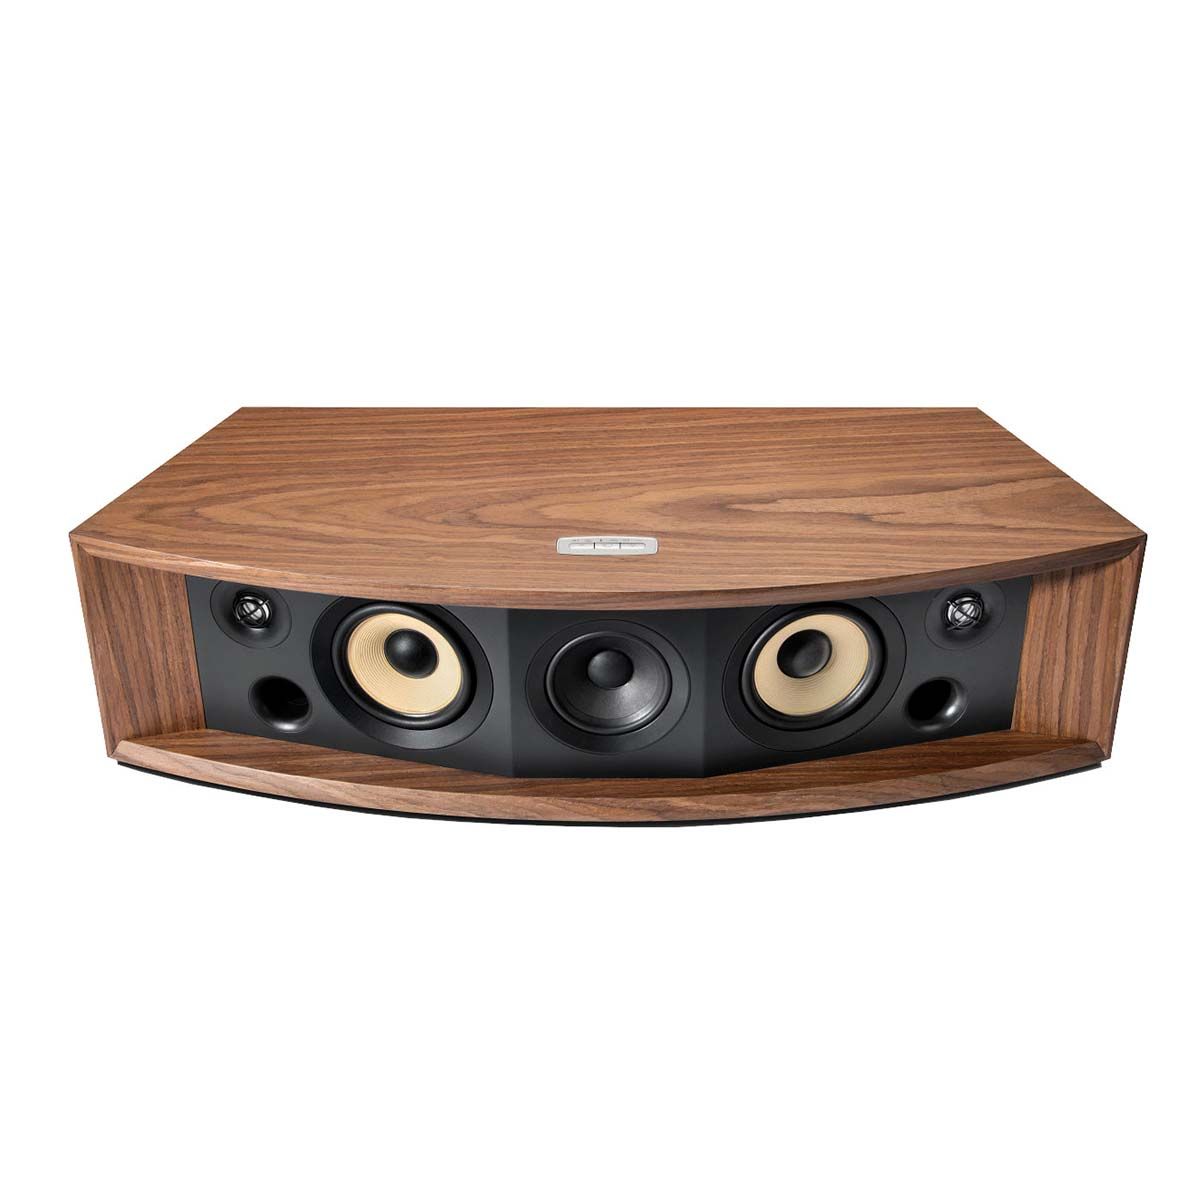 JBL L75ms Music System - Walnut angled top view without grille